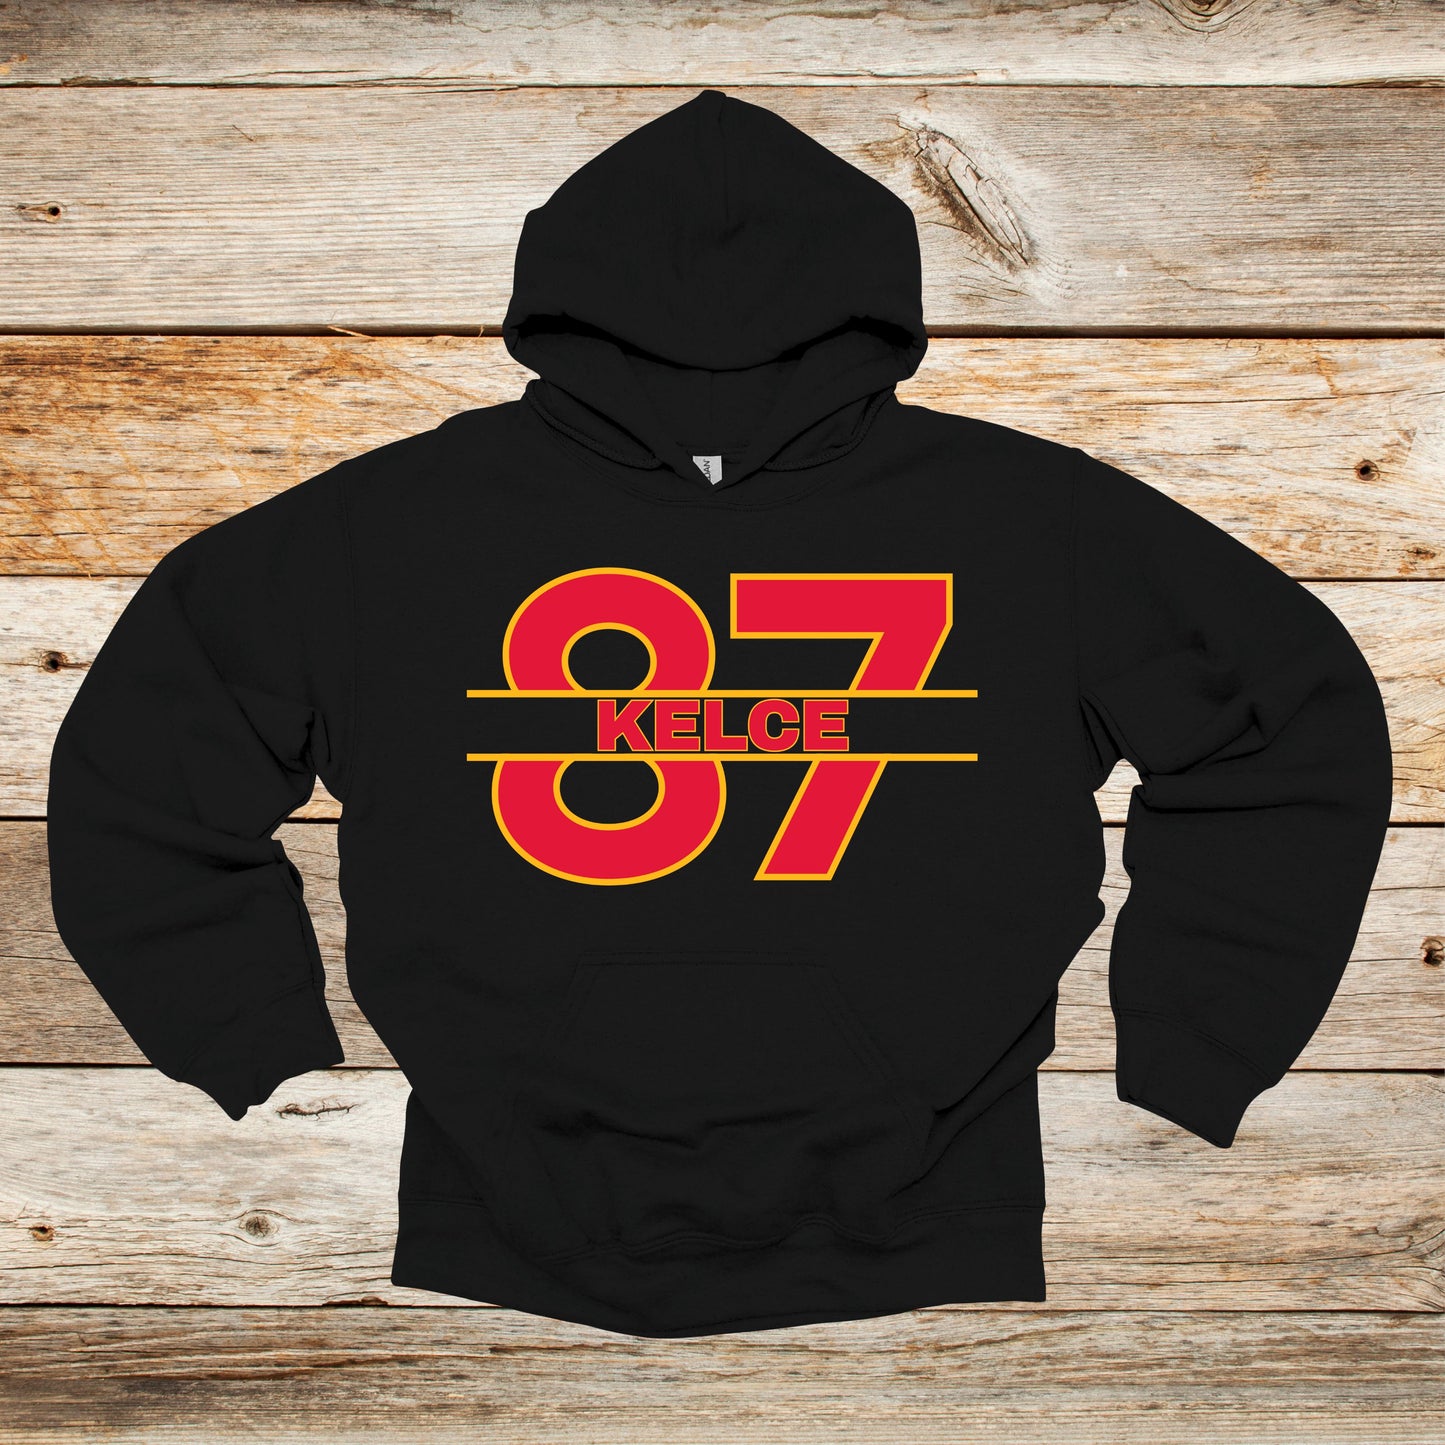 Football Crewneck and Hooded Sweatshirt - Chiefs Football - 87 Kelce - Adult and Children's Tee Shirts - Sports Hooded Sweatshirt Graphic Avenue Hooded Sweatshirt Black Adult Small